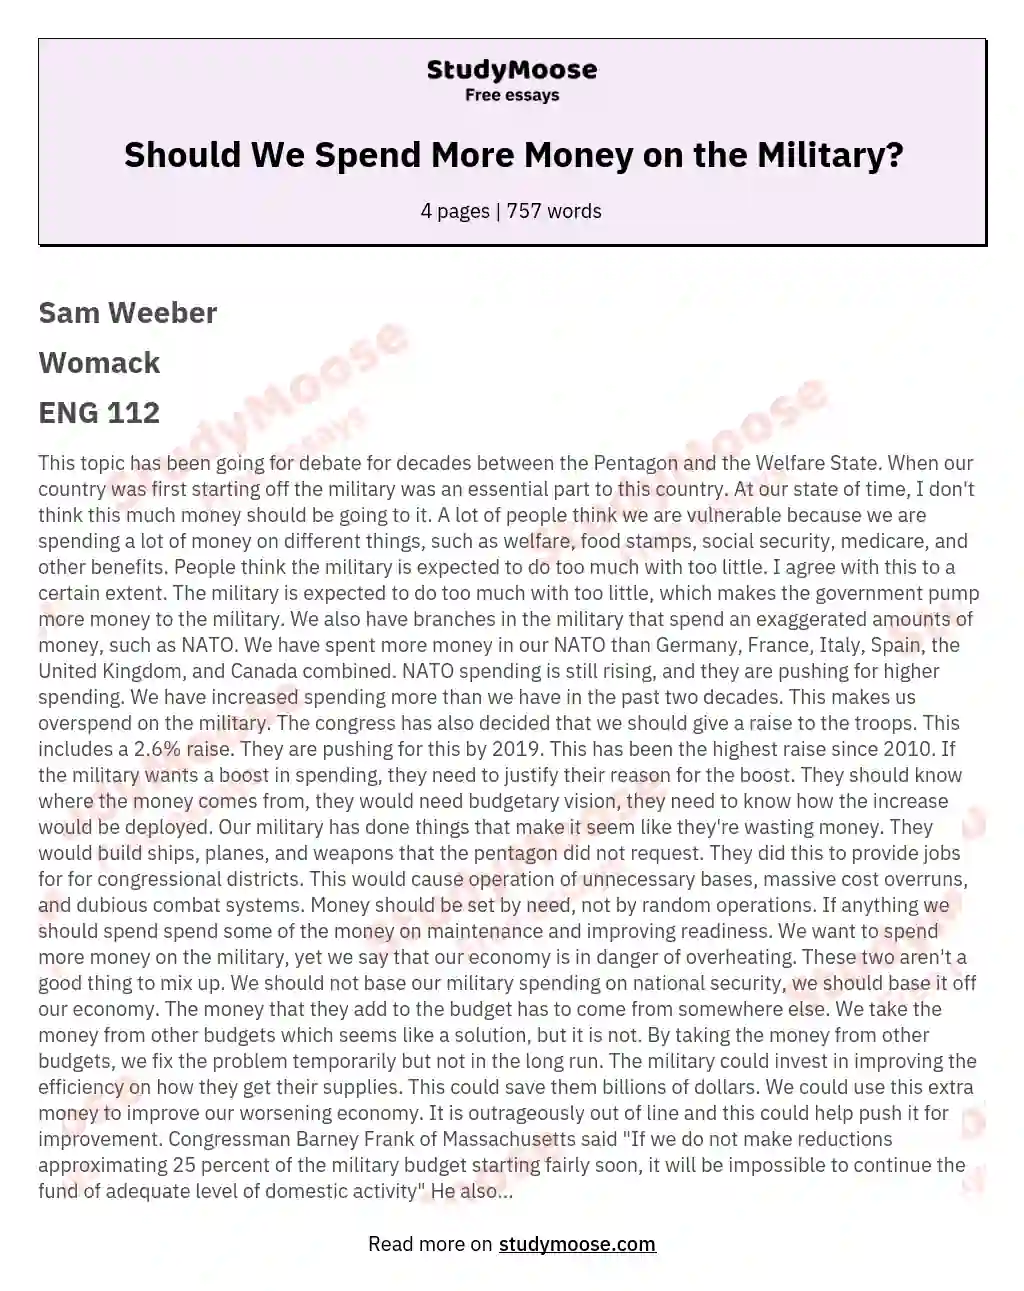 Should We Spend More Money on the Military?